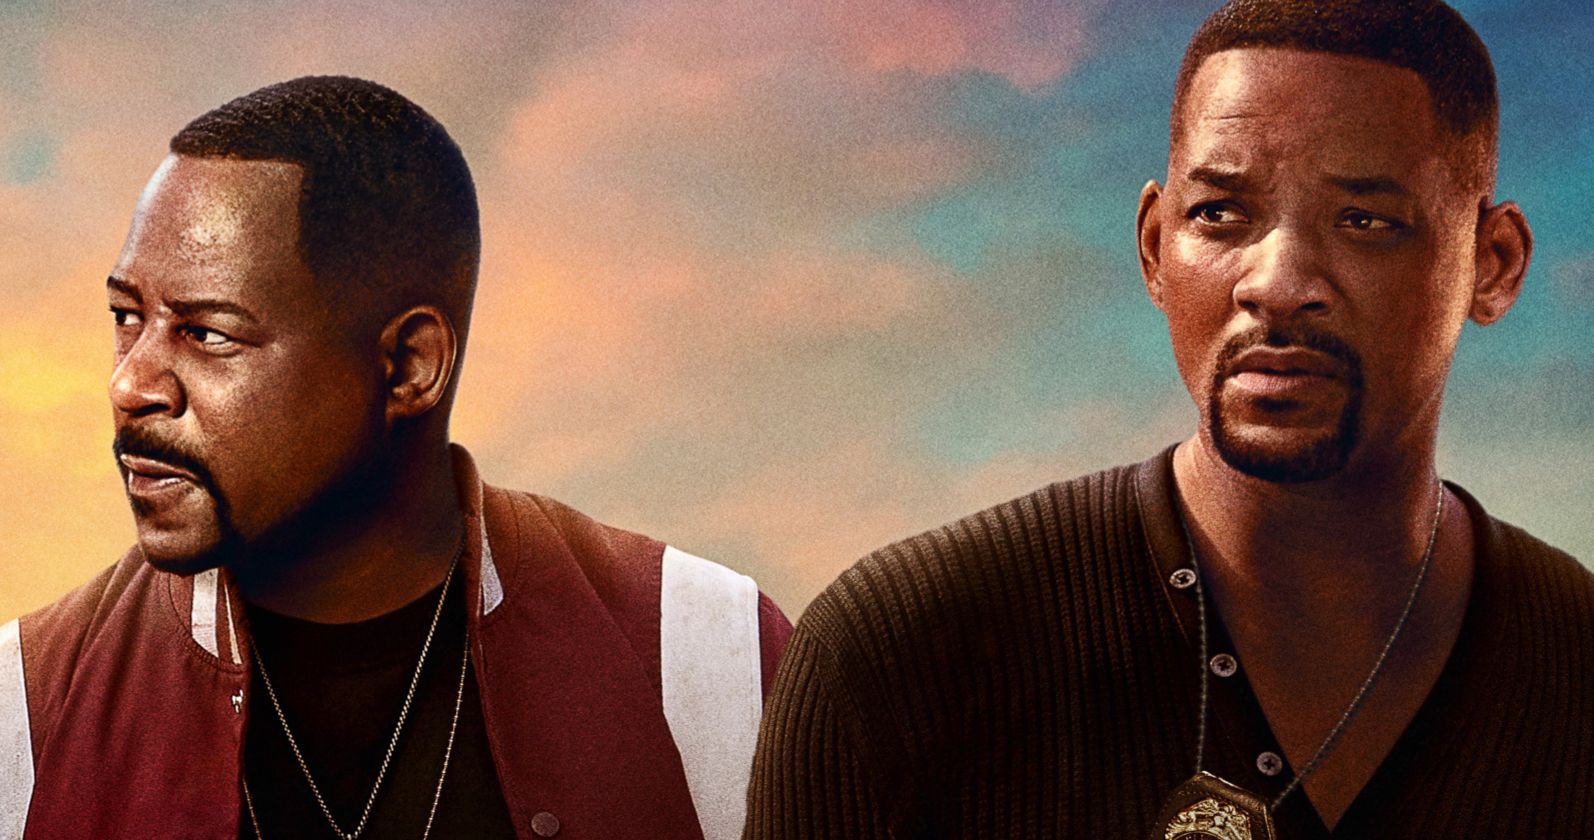 Bad Boys for Life Poster Has Will Smith and Martin Lawrence Ready to Ride or Die